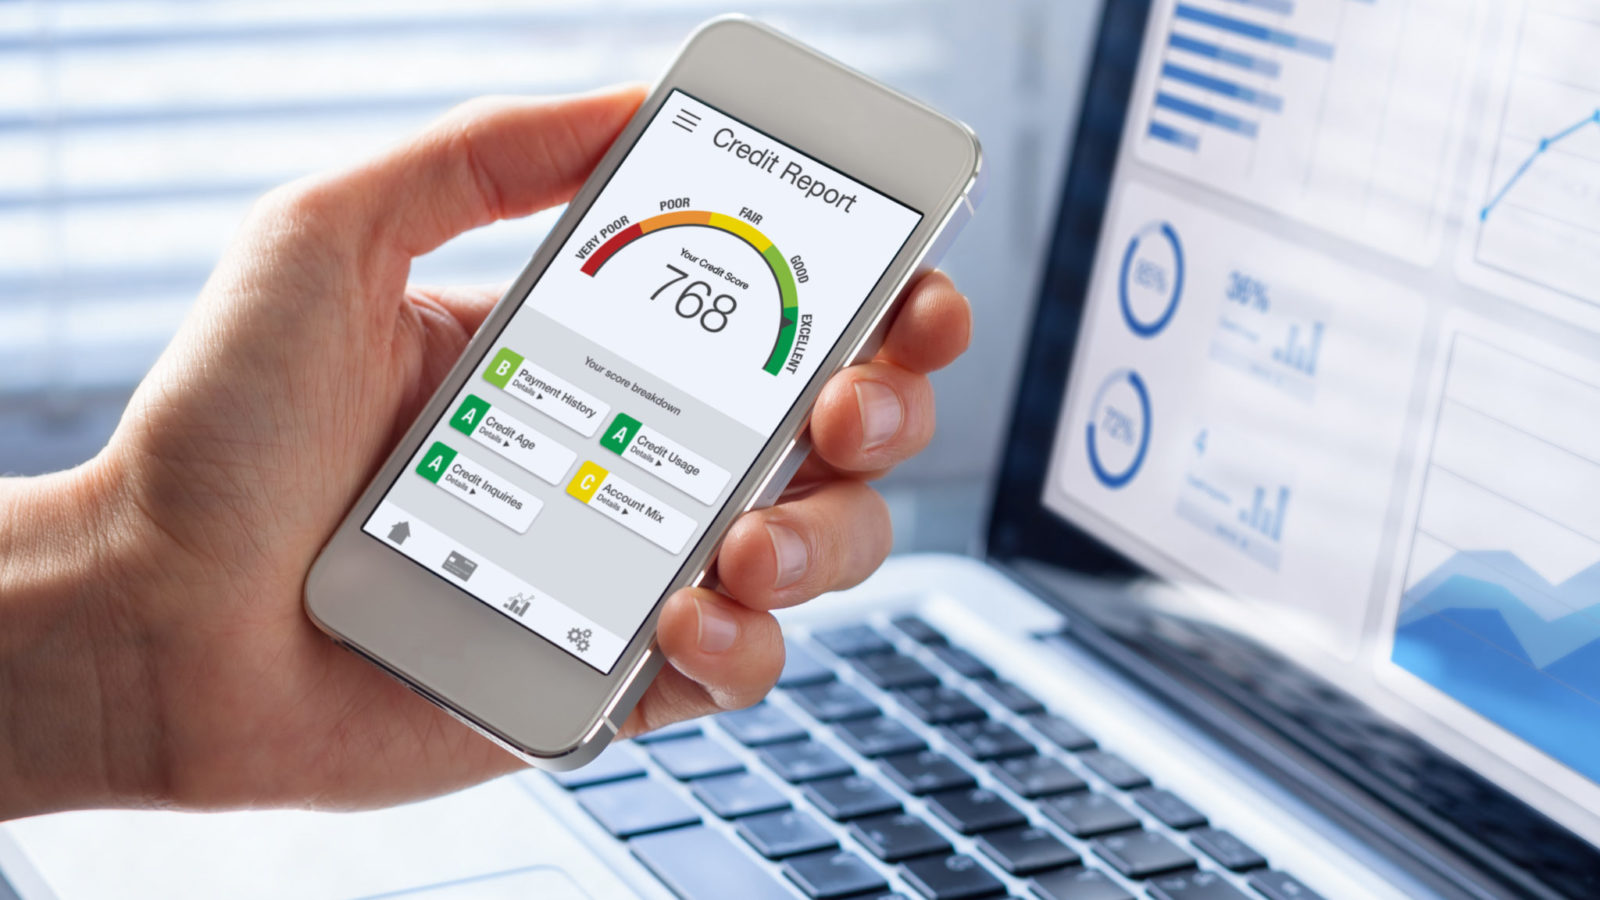 Credit Report with Score rating app on smartphone screen showing credit score